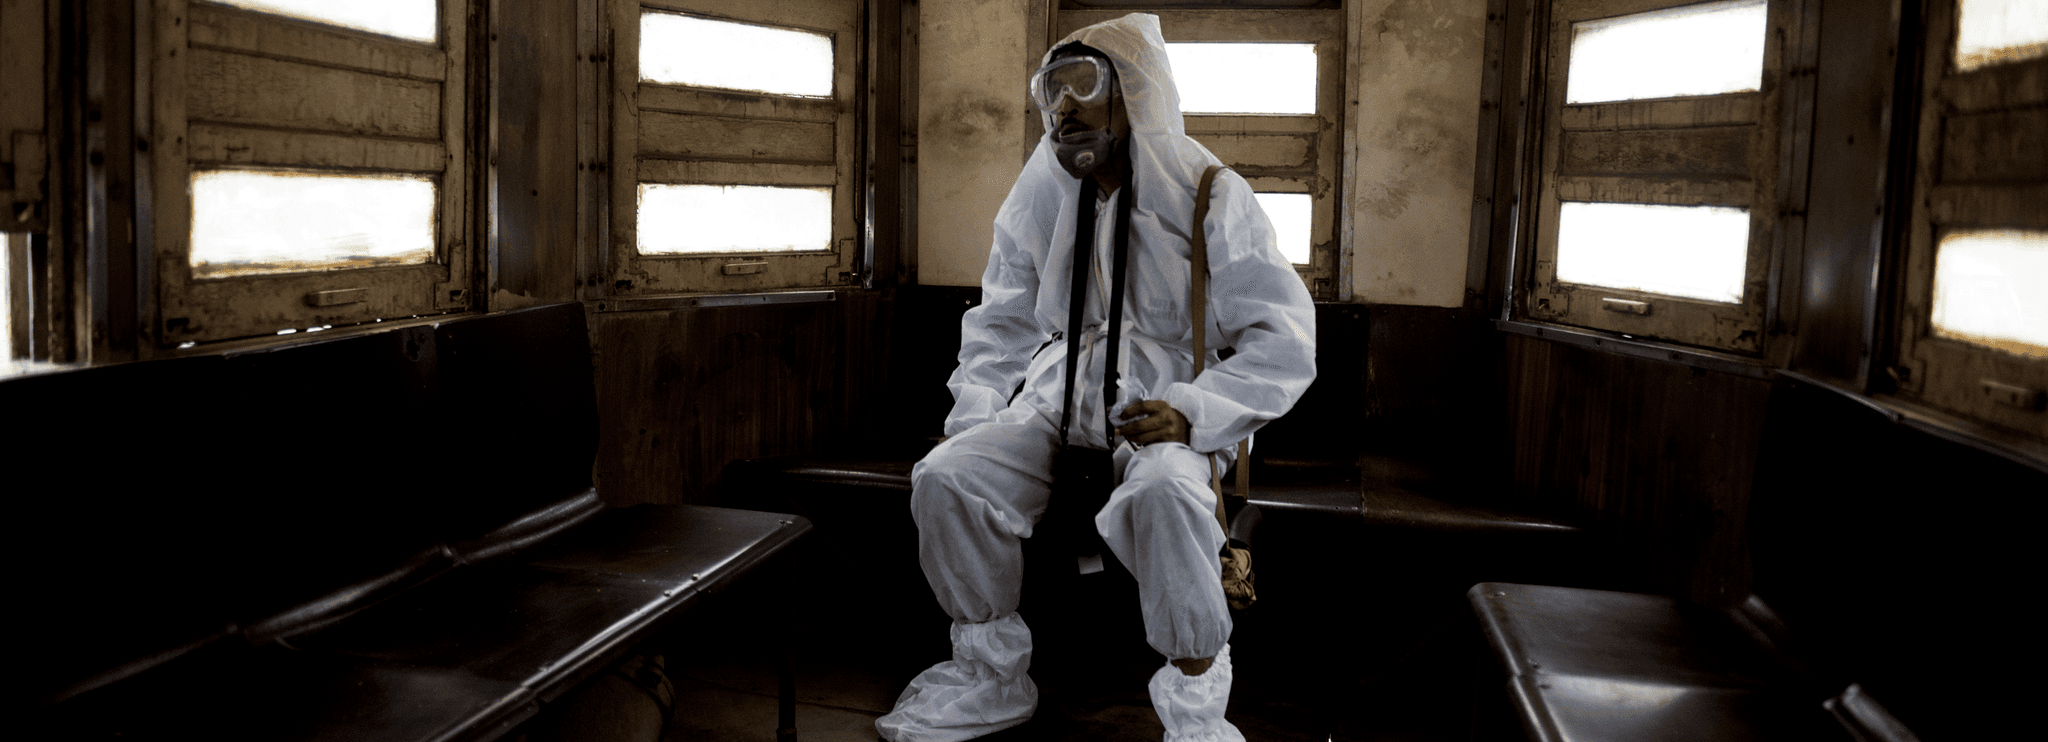 A tram conductor in Kolkata, India, wears protective clothing from head to toe in the heat of a summer afternoon, during the Covid-19 pandemic. 